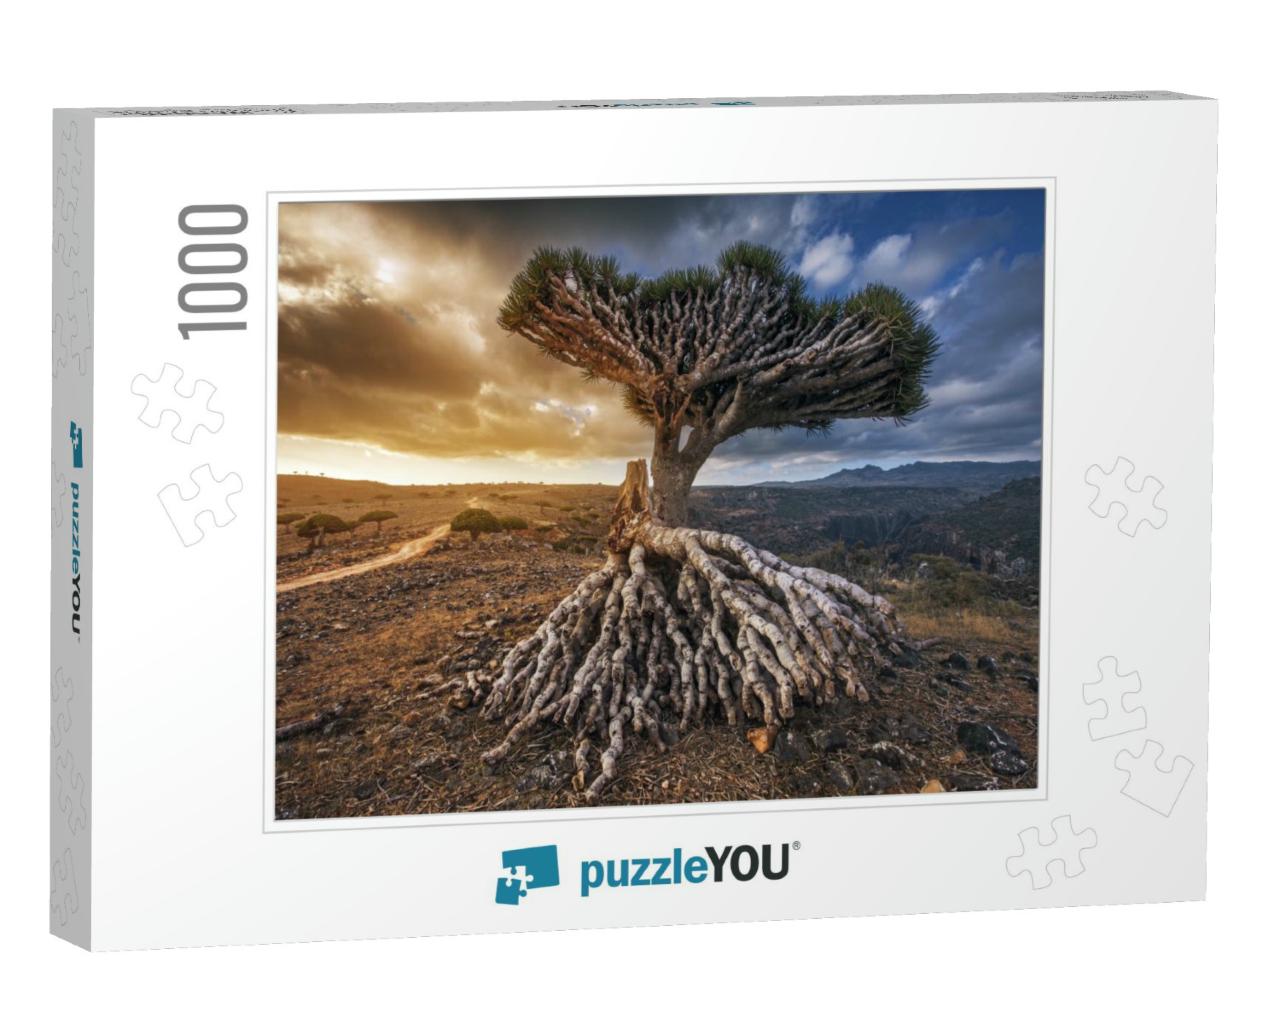 Dragon Trees At Dixam Plateau, Socotra Island, Yemen... Jigsaw Puzzle with 1000 pieces